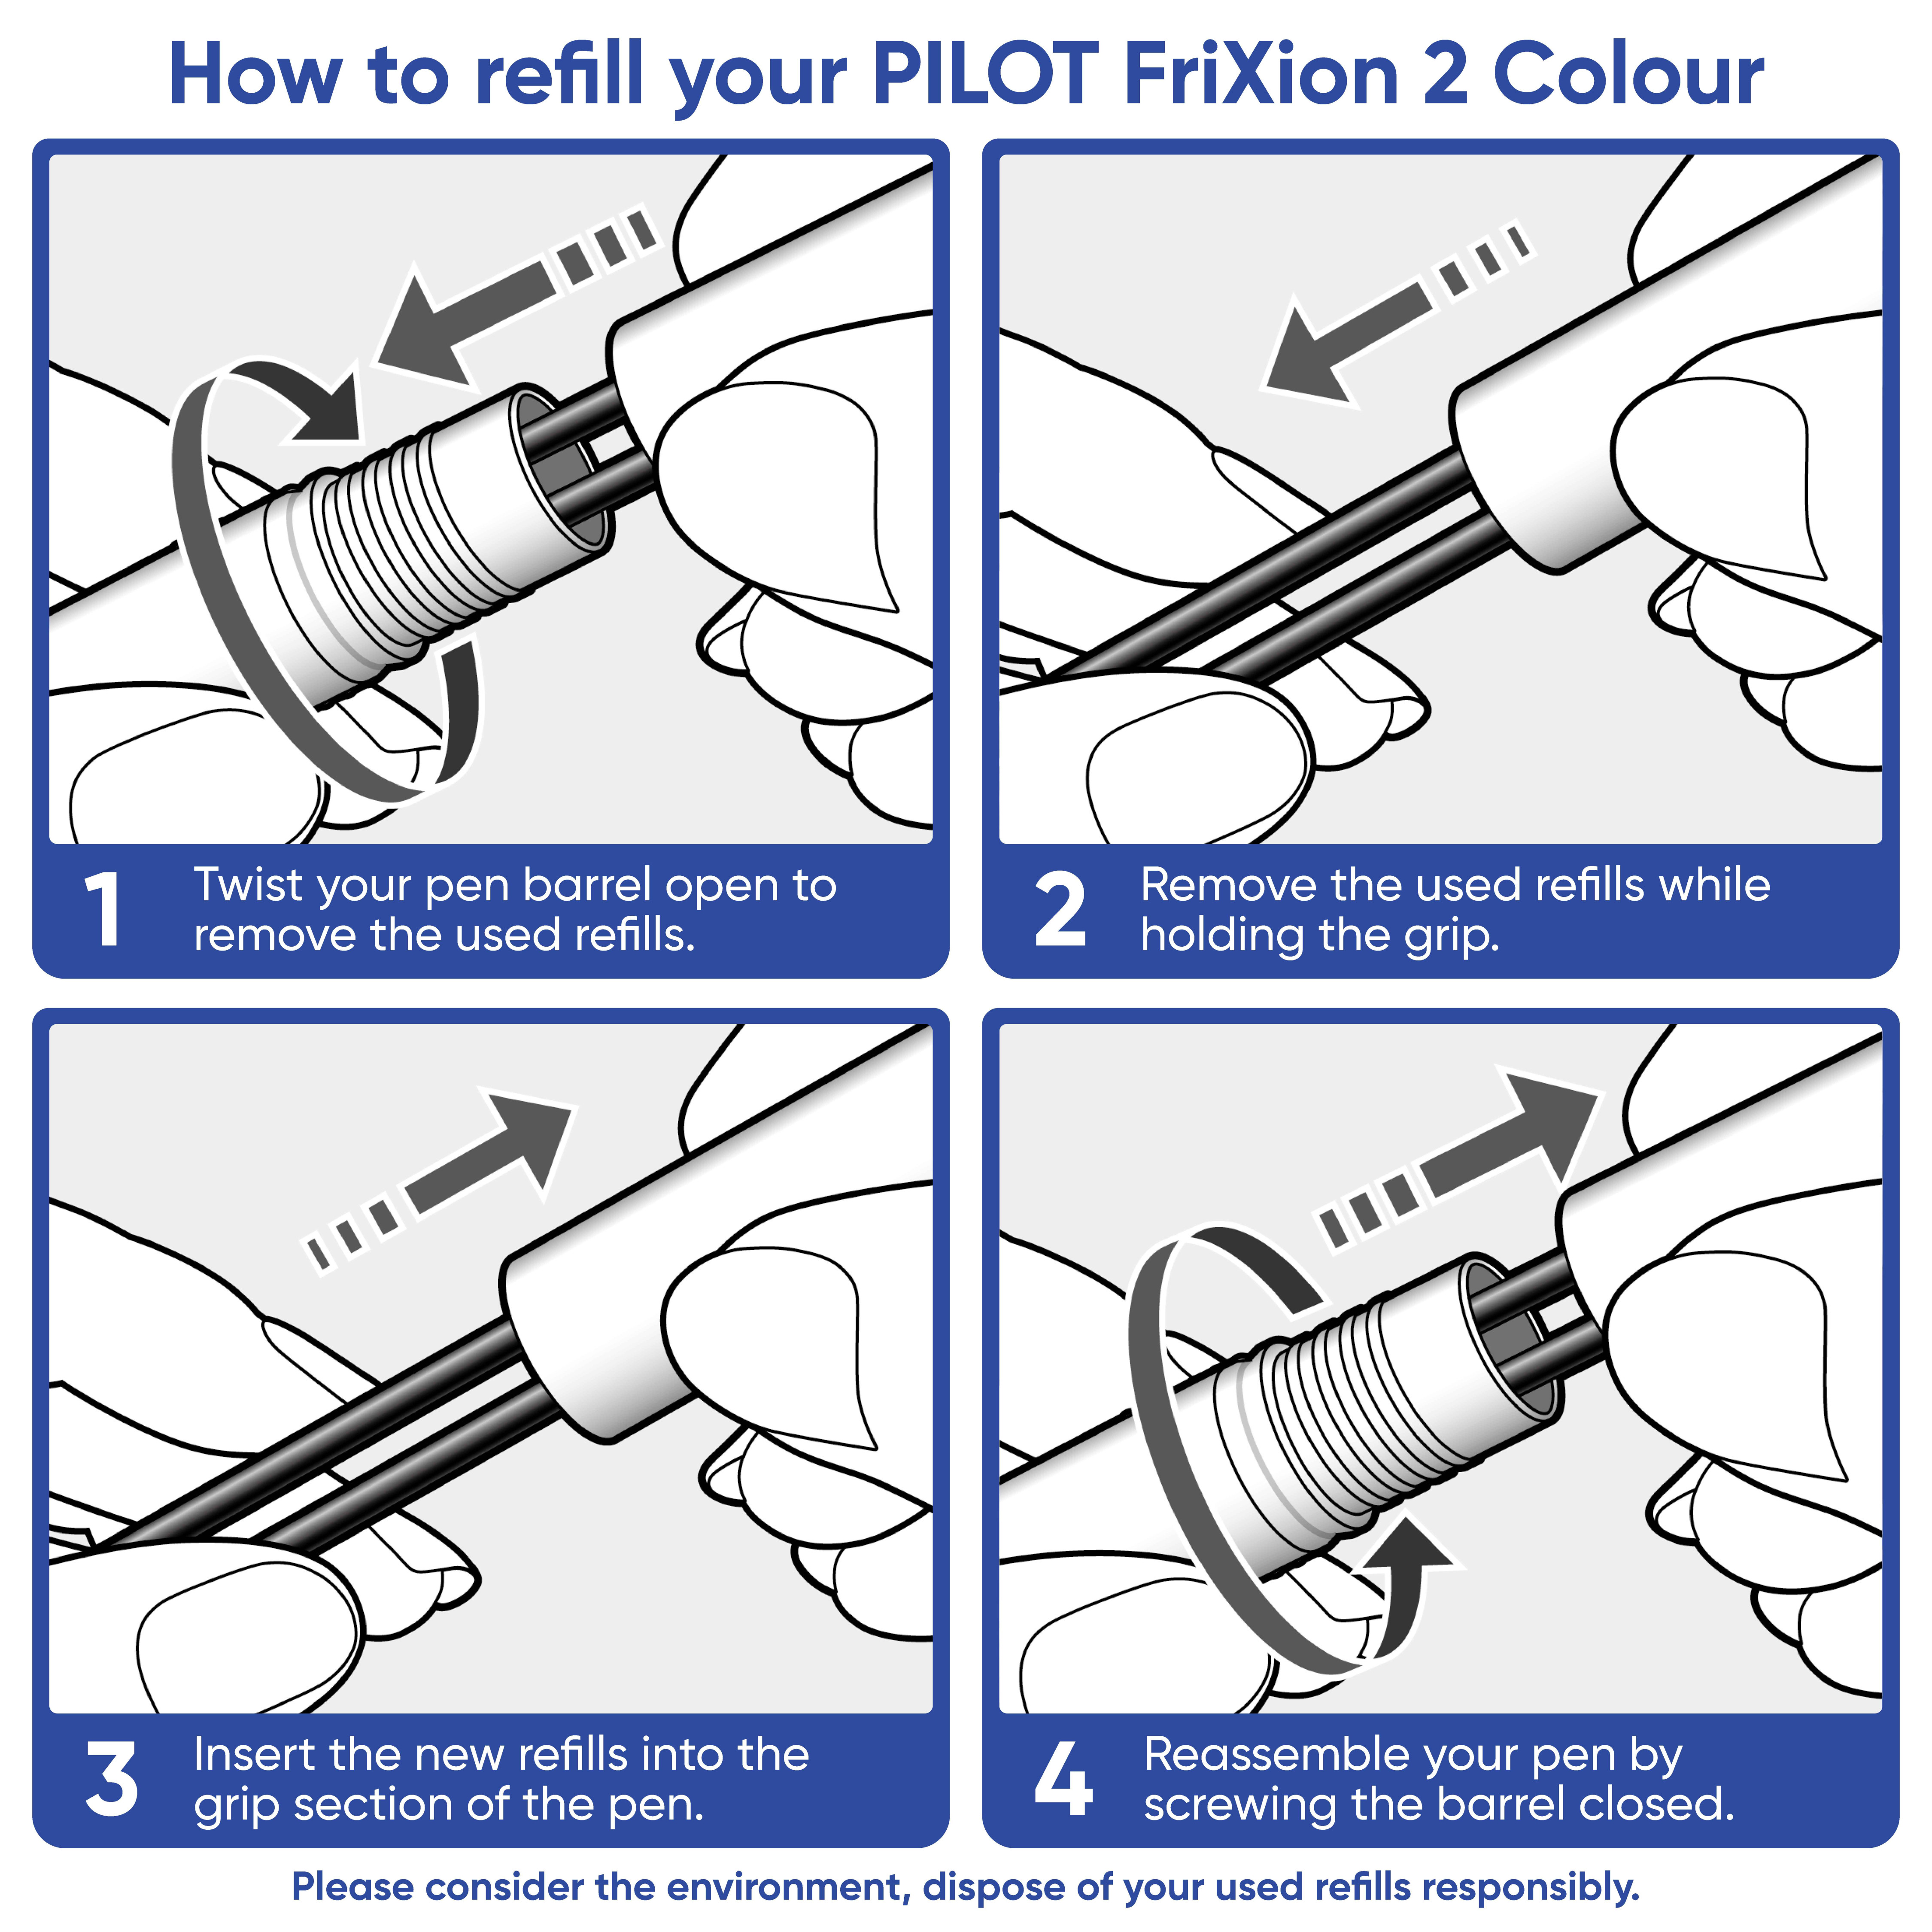 A diagram of how to refill your PILOT FriXion 2 Colour pen. Step 1: Twist your pen barrel open to remove used refills. Step 2: Remove the used refills while holding the grip. Step 3: Insert new refills into the grip section of the pen. Step 4: Reassemble the pen by screwing the barrel closed. Below is a reminder: 'Please consider the environment, dispose of your used refills responsibly.